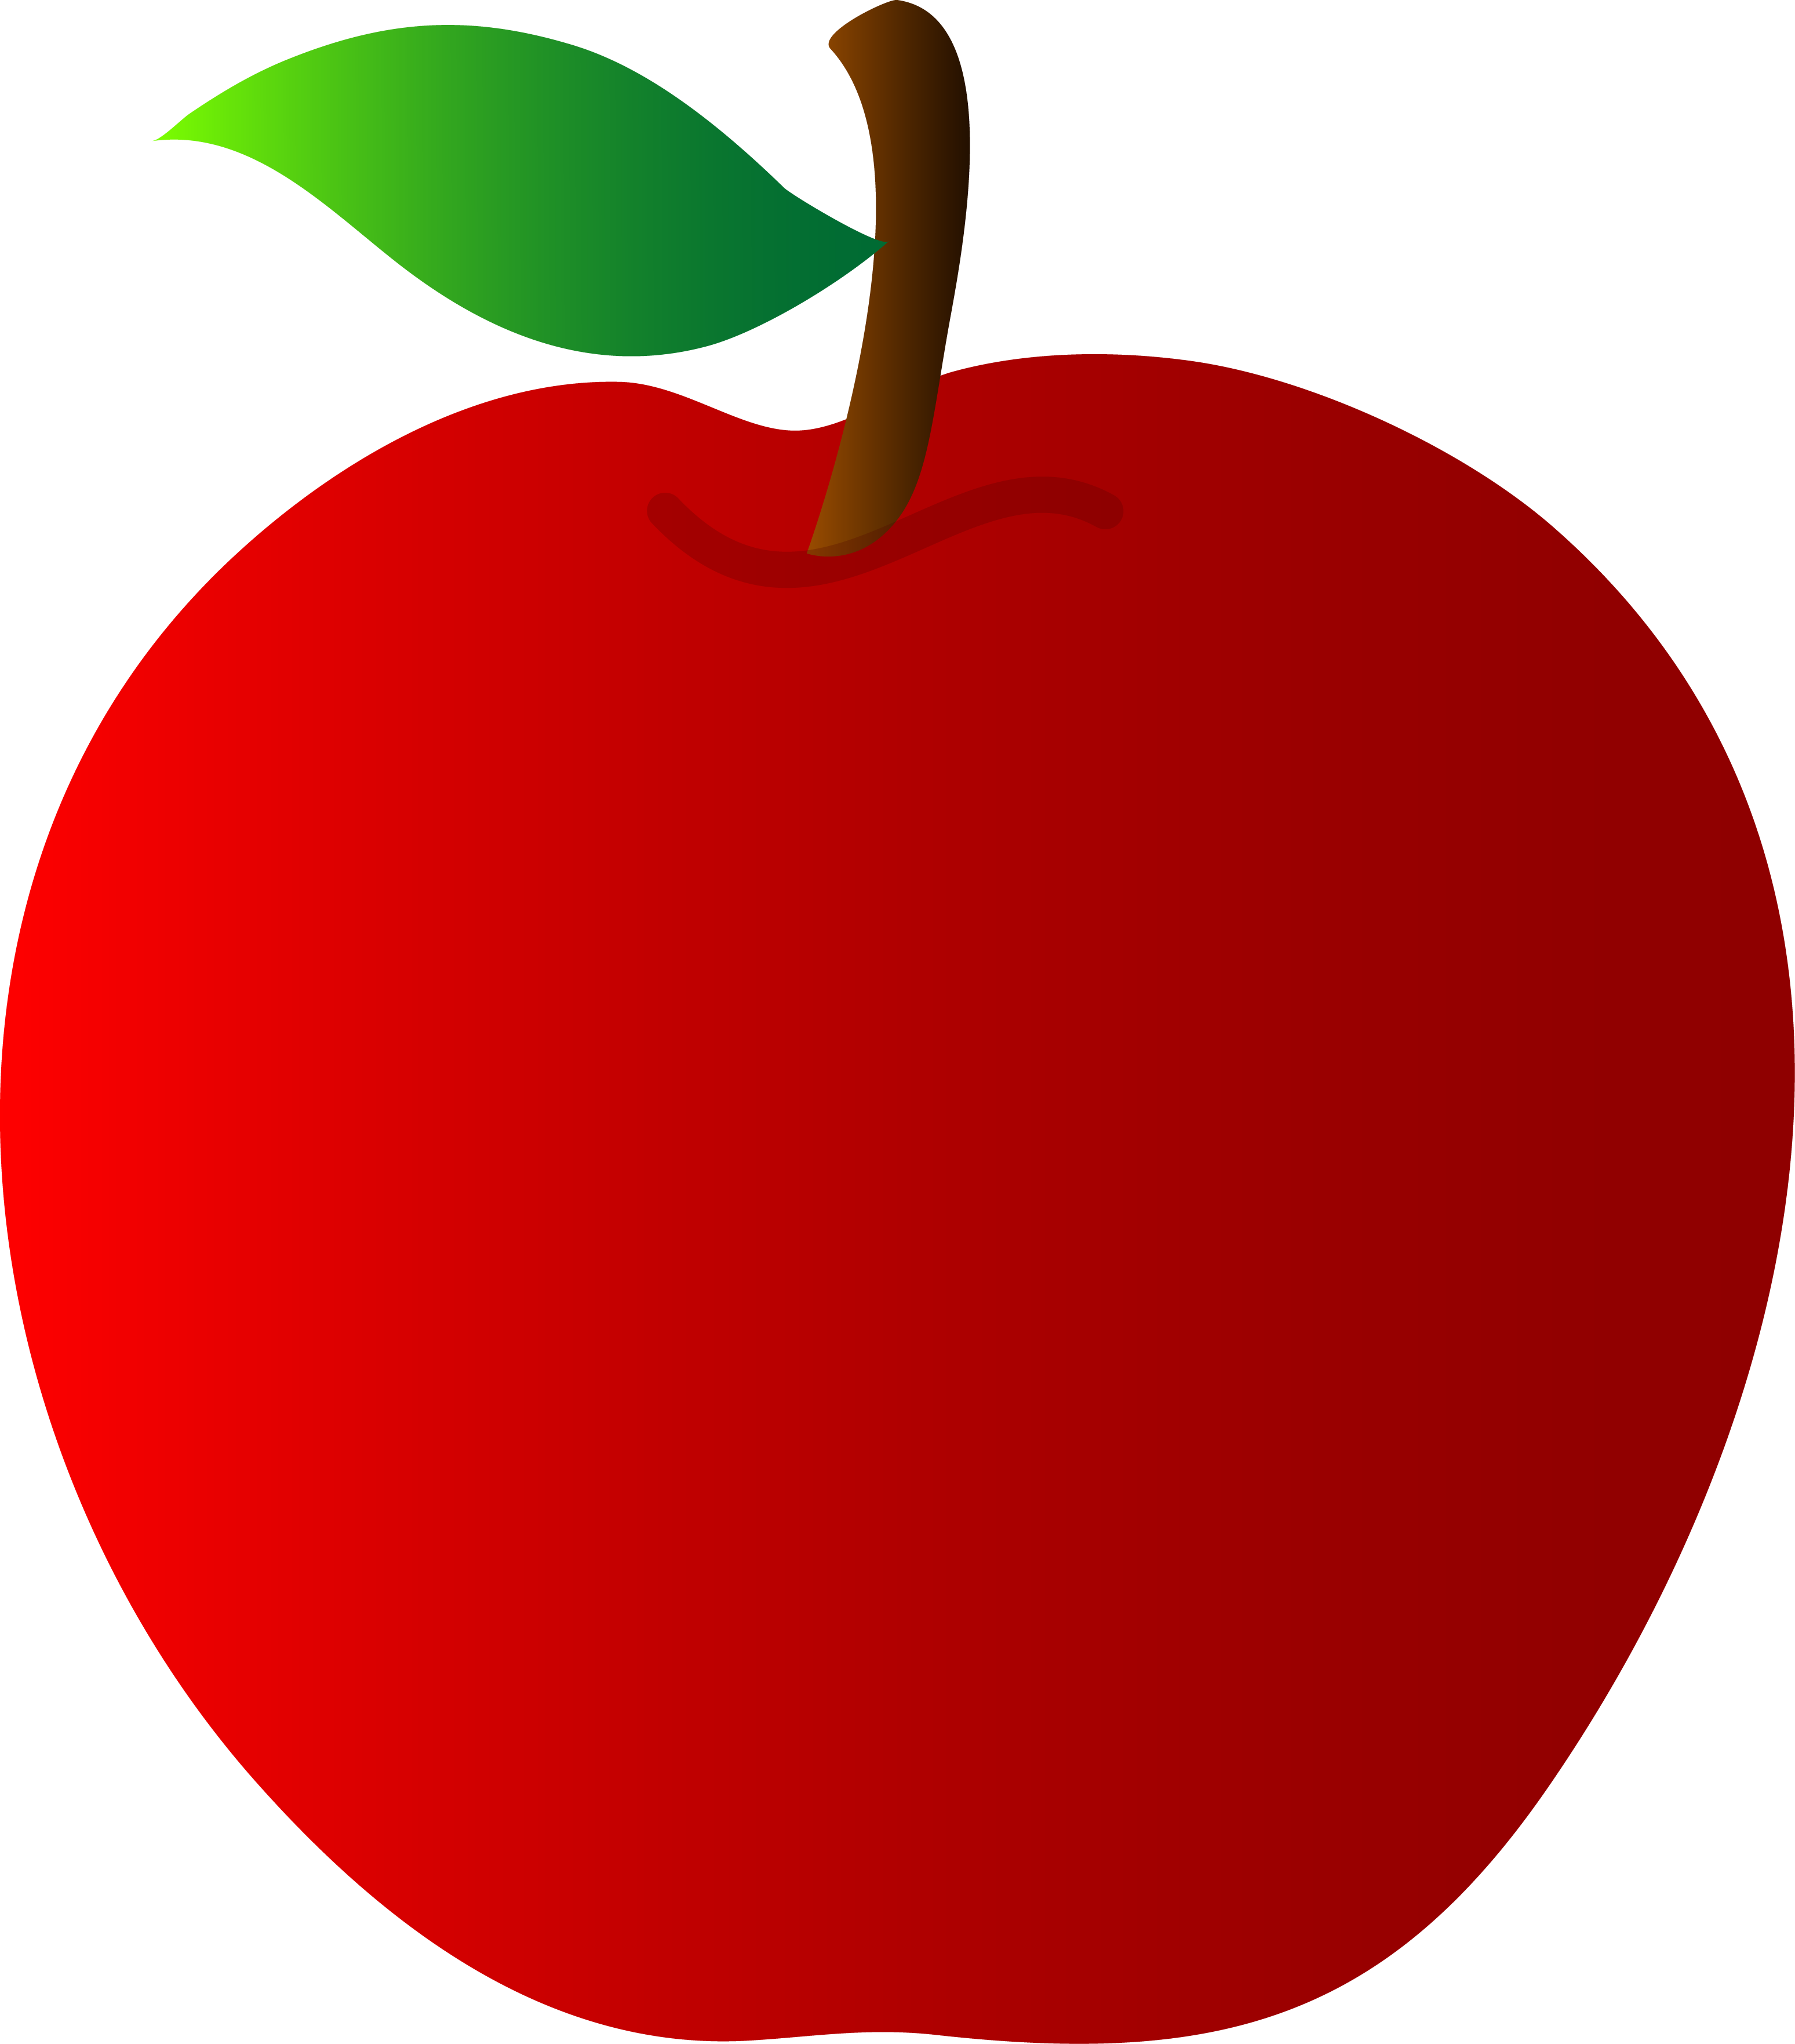 Cartoon Pictures Of Apples